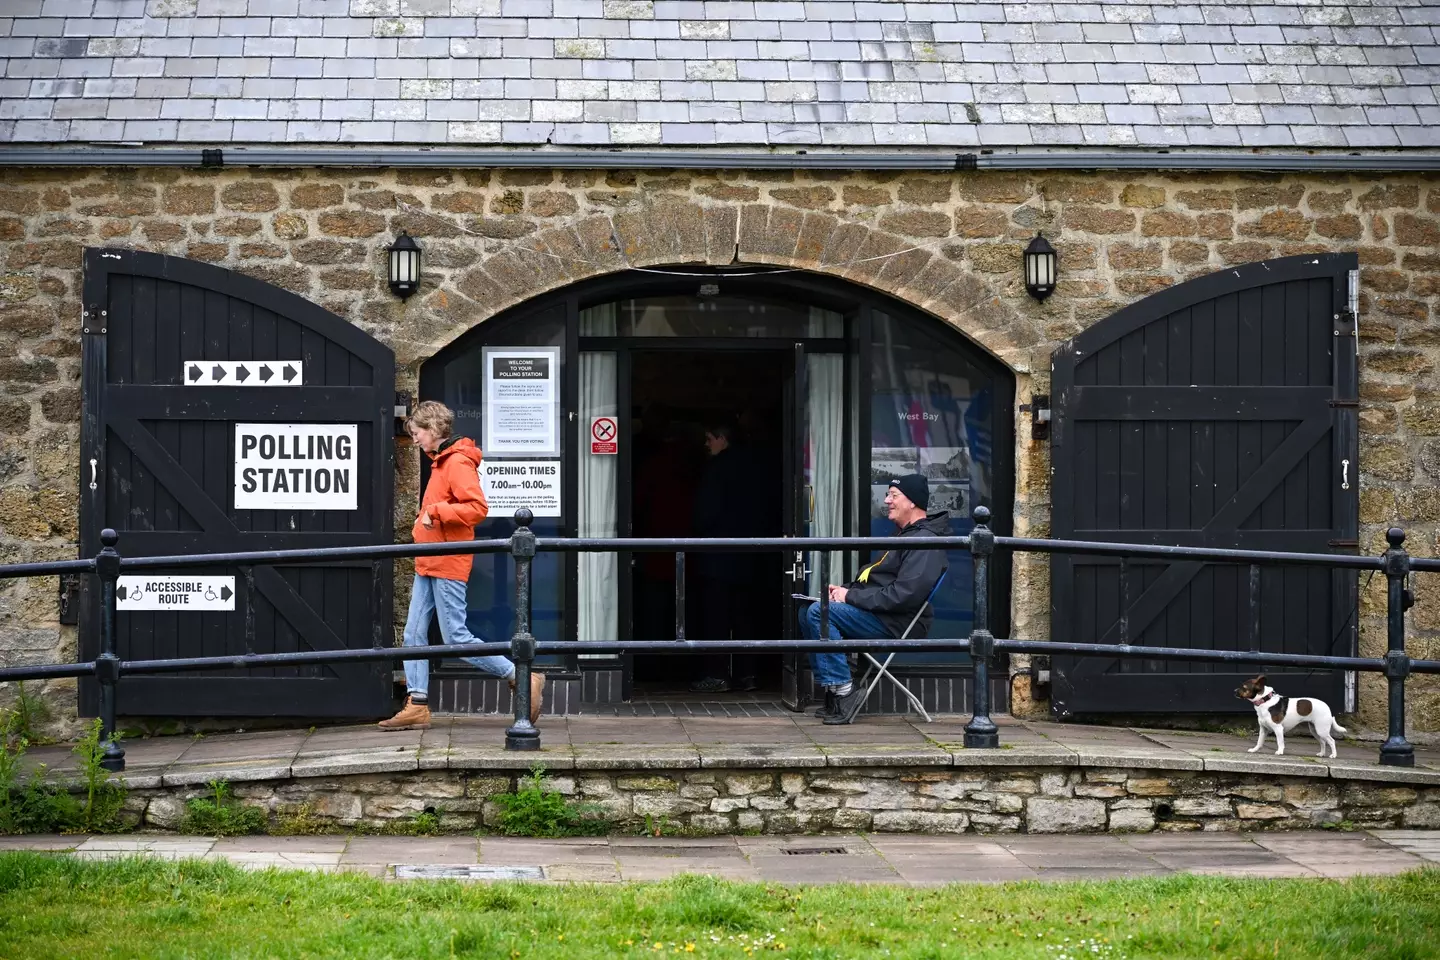 If you're not sure exactly what to do then staff at the polling station will be able to help you. (Finnbarr Webster/Getty Images)